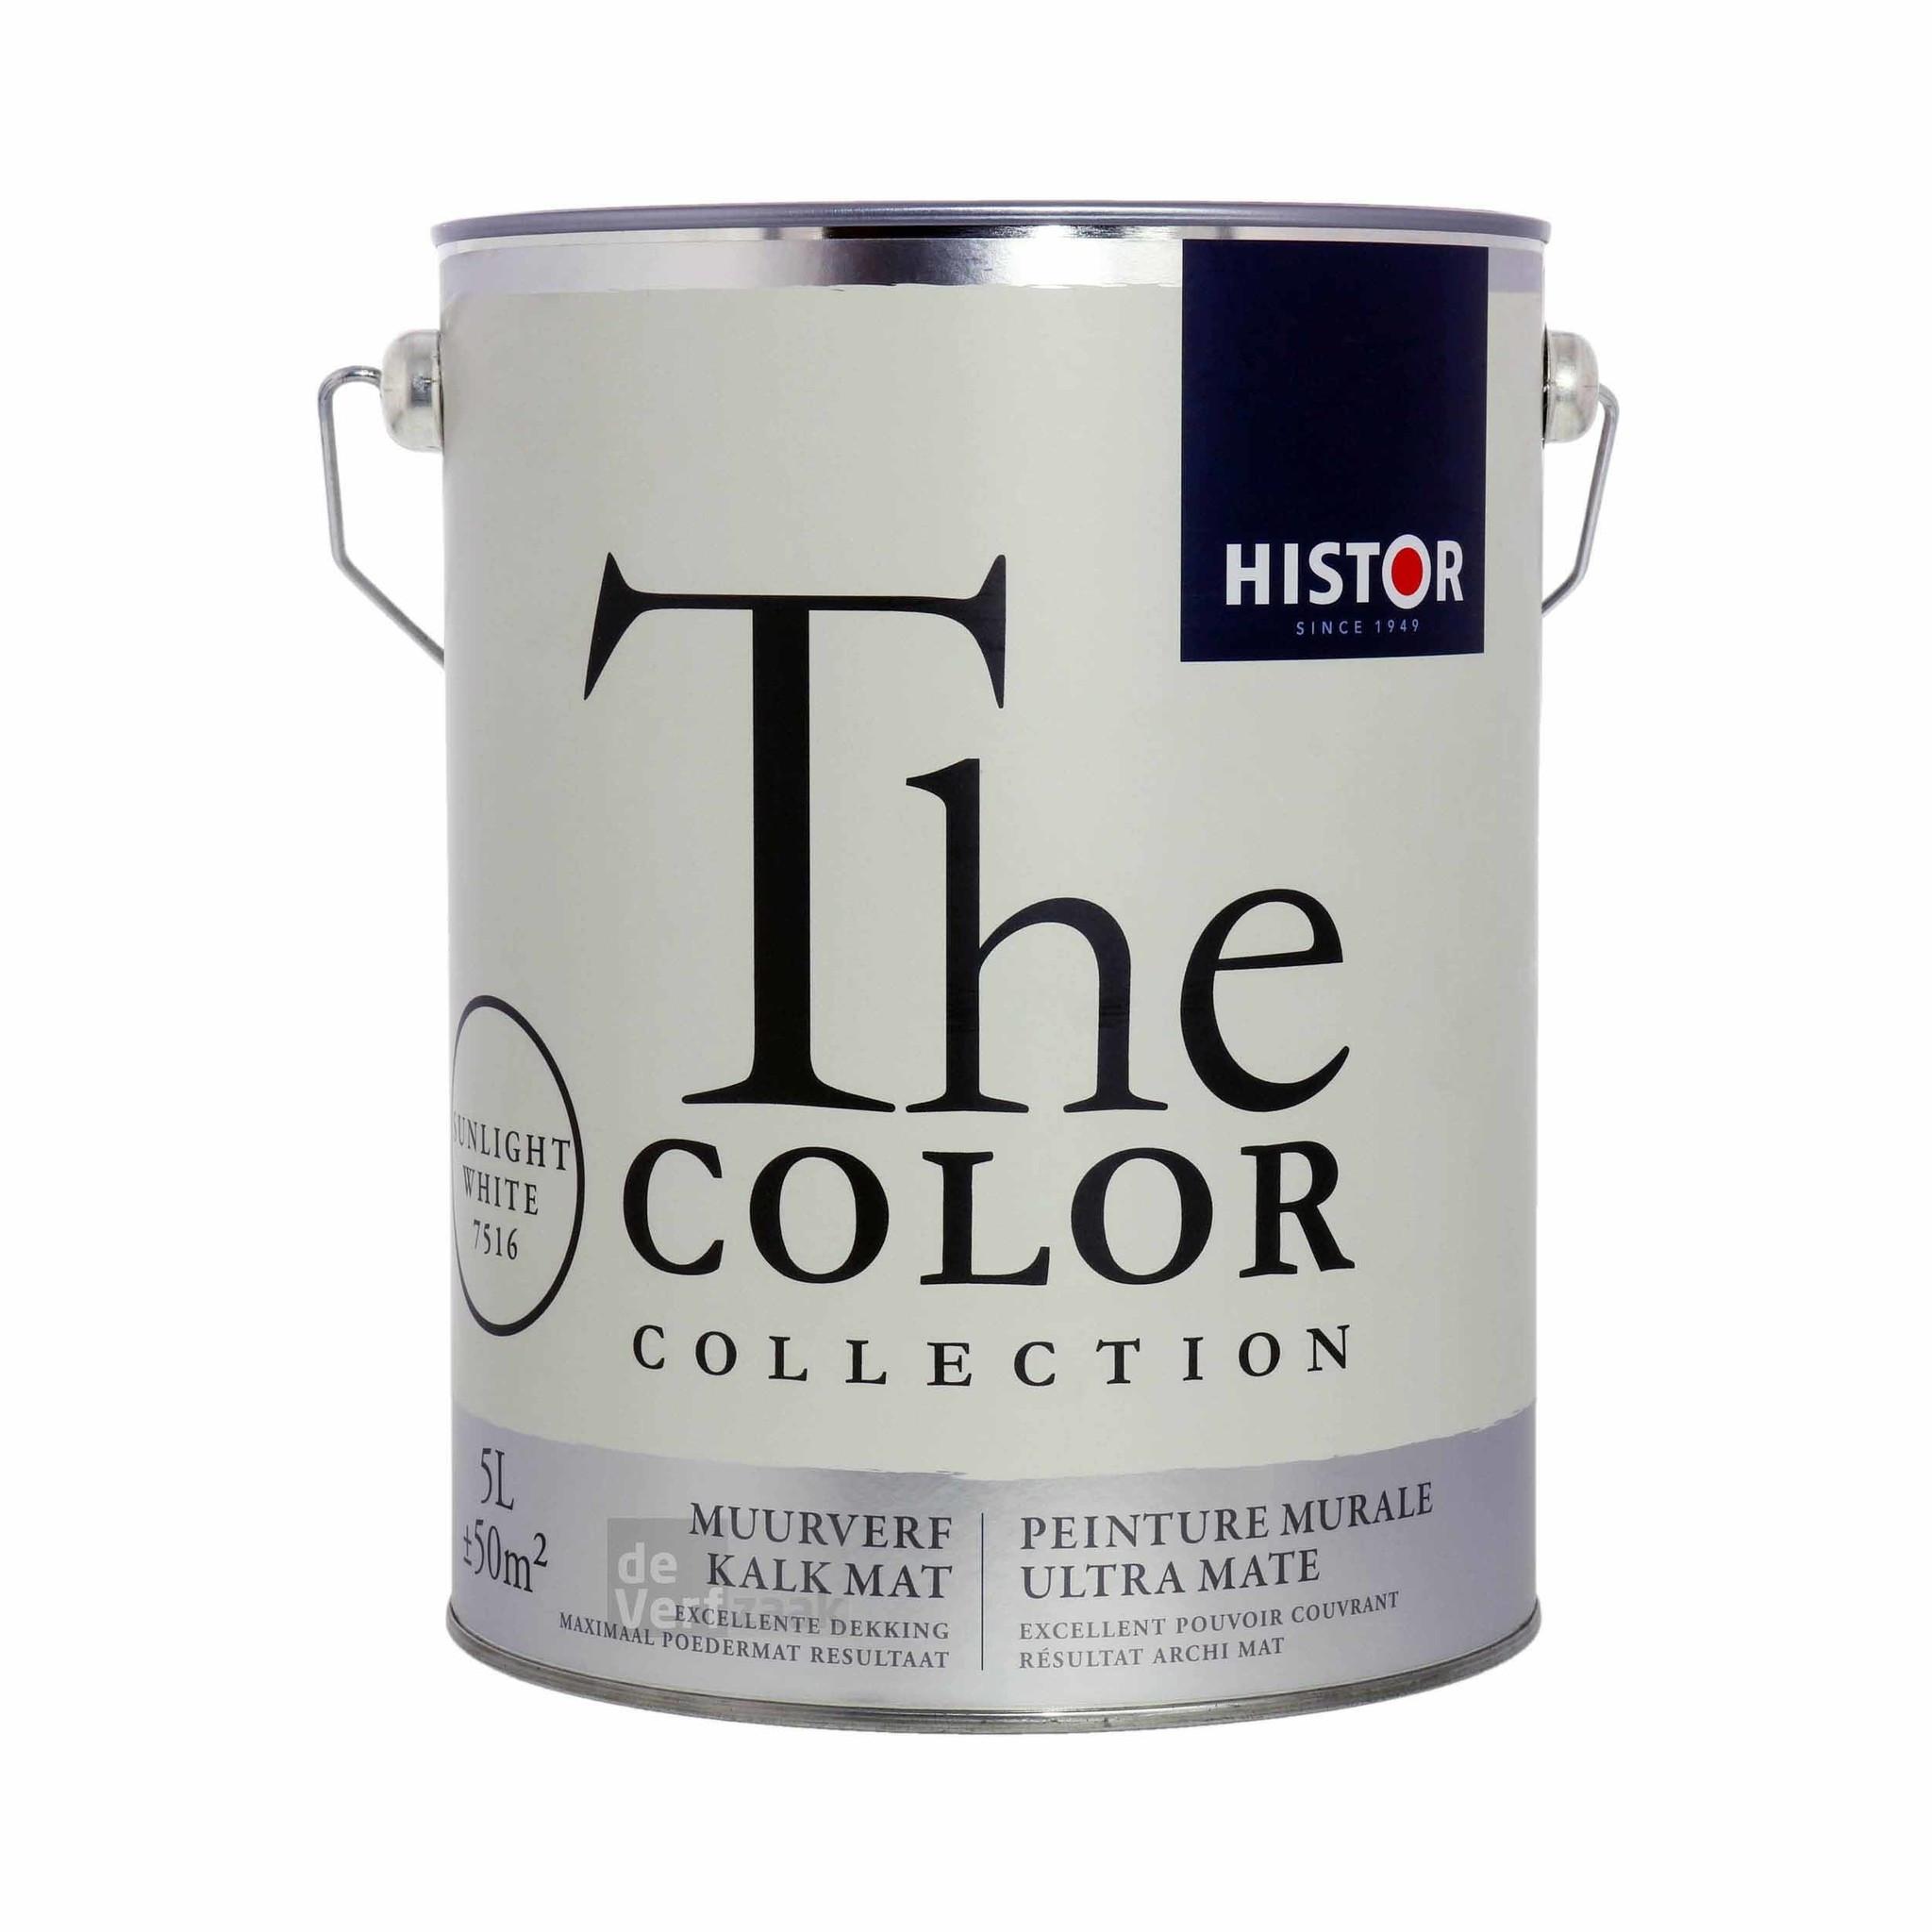 Histor The Color Collection Muurverf Kalkmat - Sunlight White